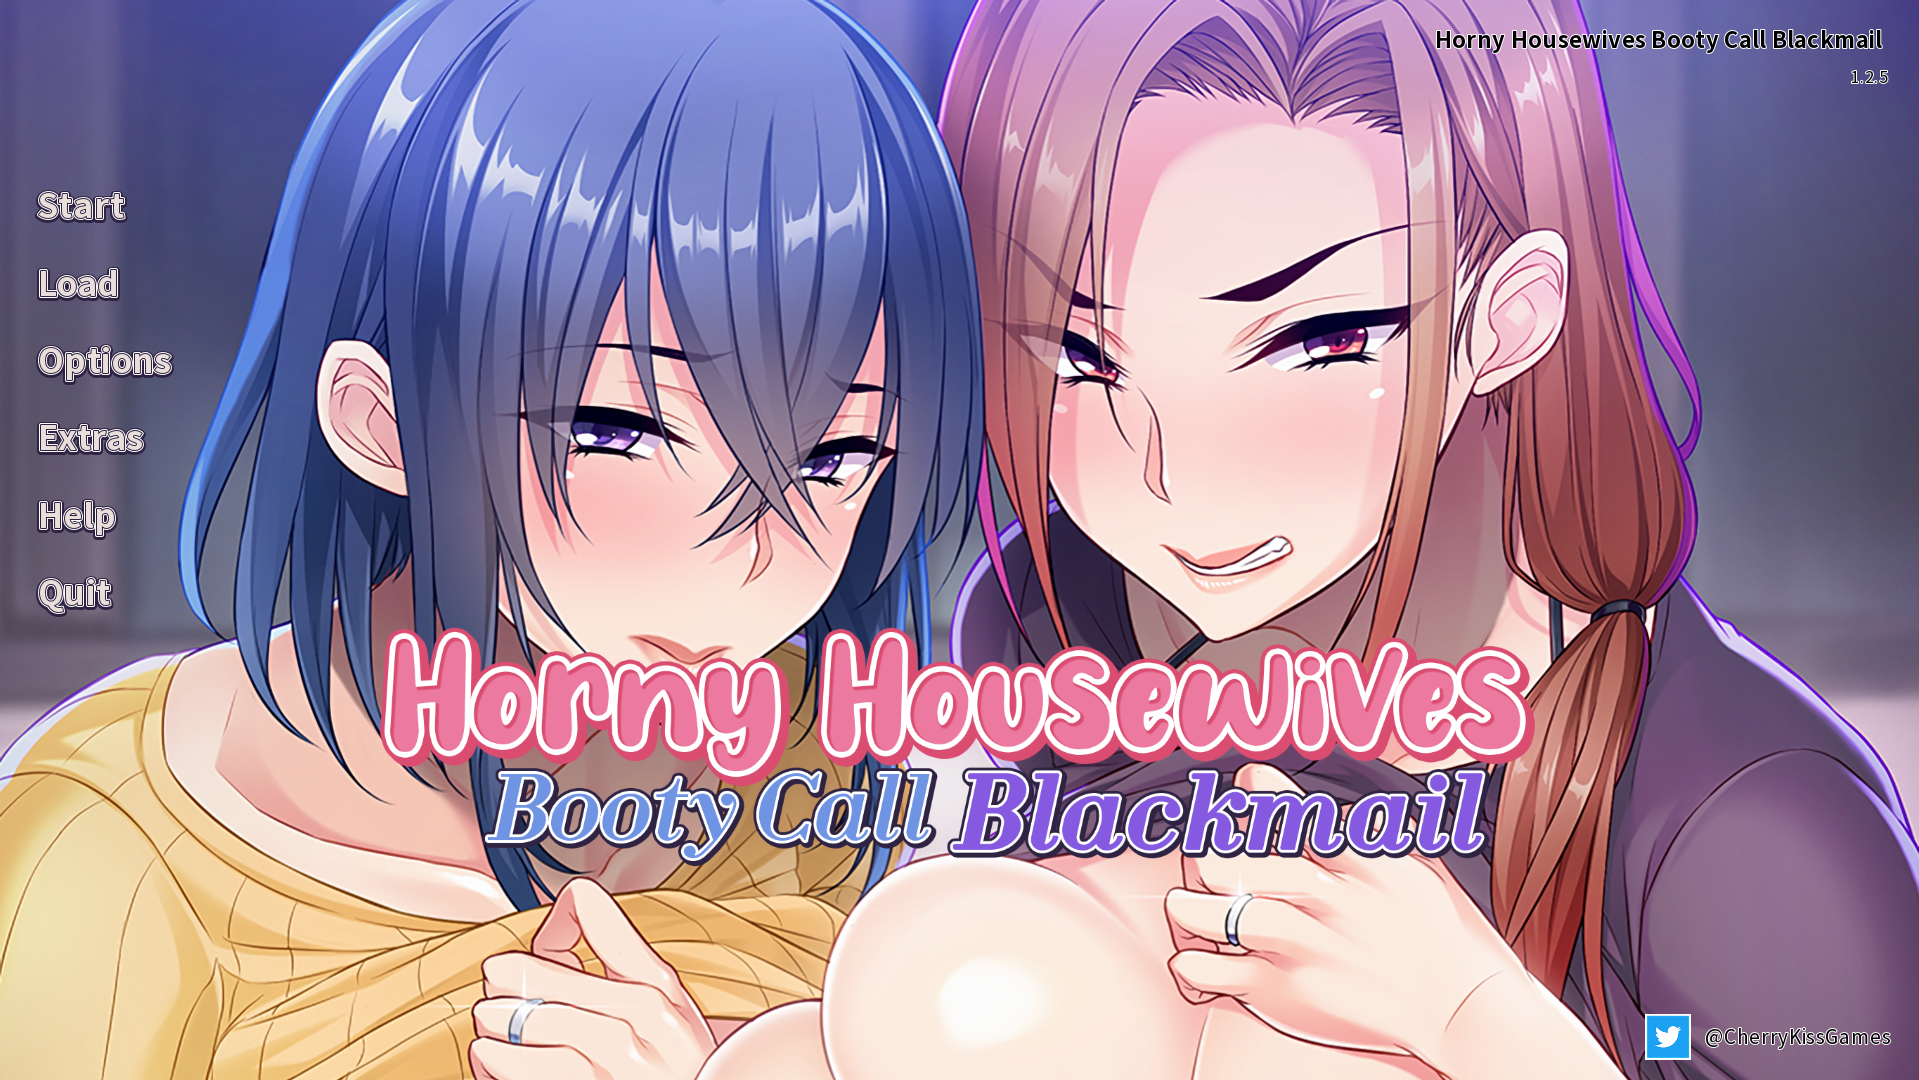 Horny Housewives Booty Call Blackmail COMPLETED - free game download, reviews, mega pic